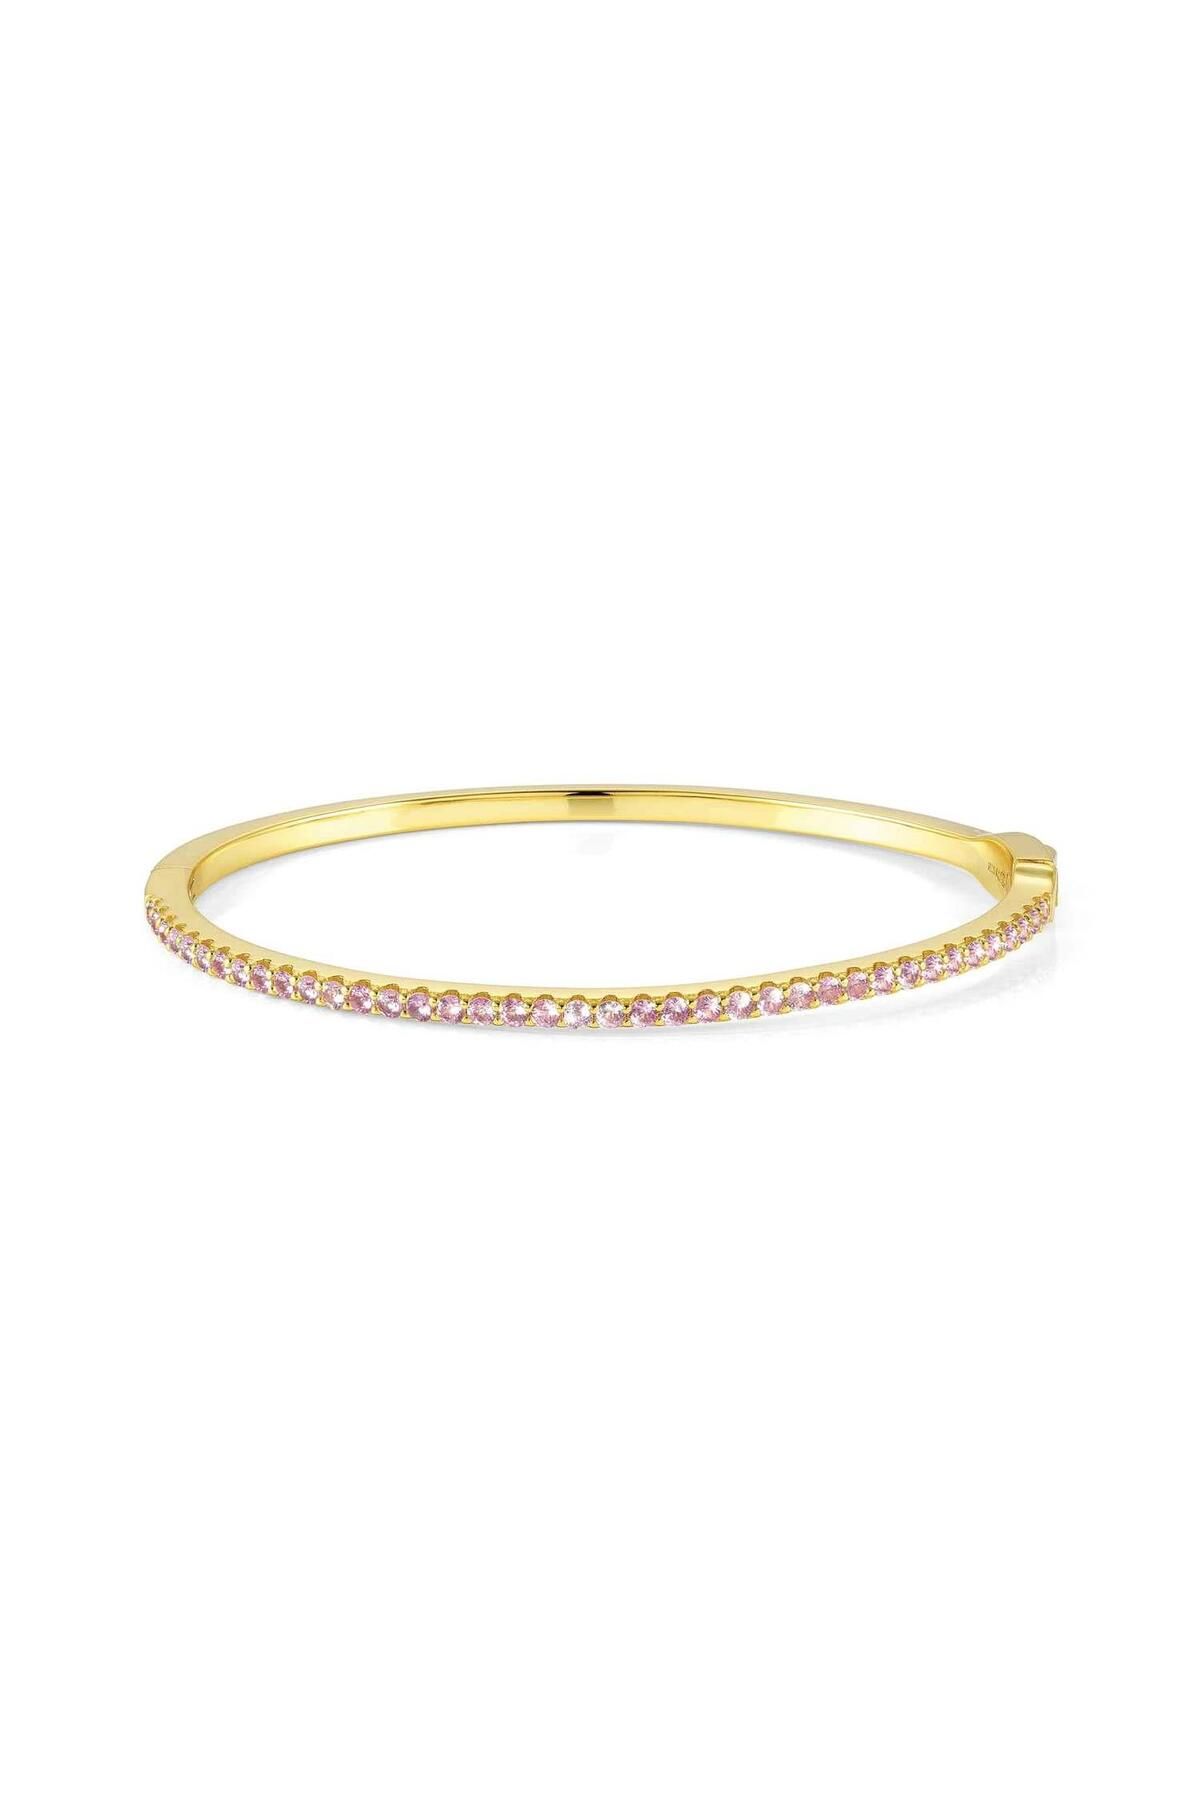 NOMİNATİON Lovelıght Bracelet In 925 Silver And Cz (small Hard) (018_pınk Fin, Yellow Gold)